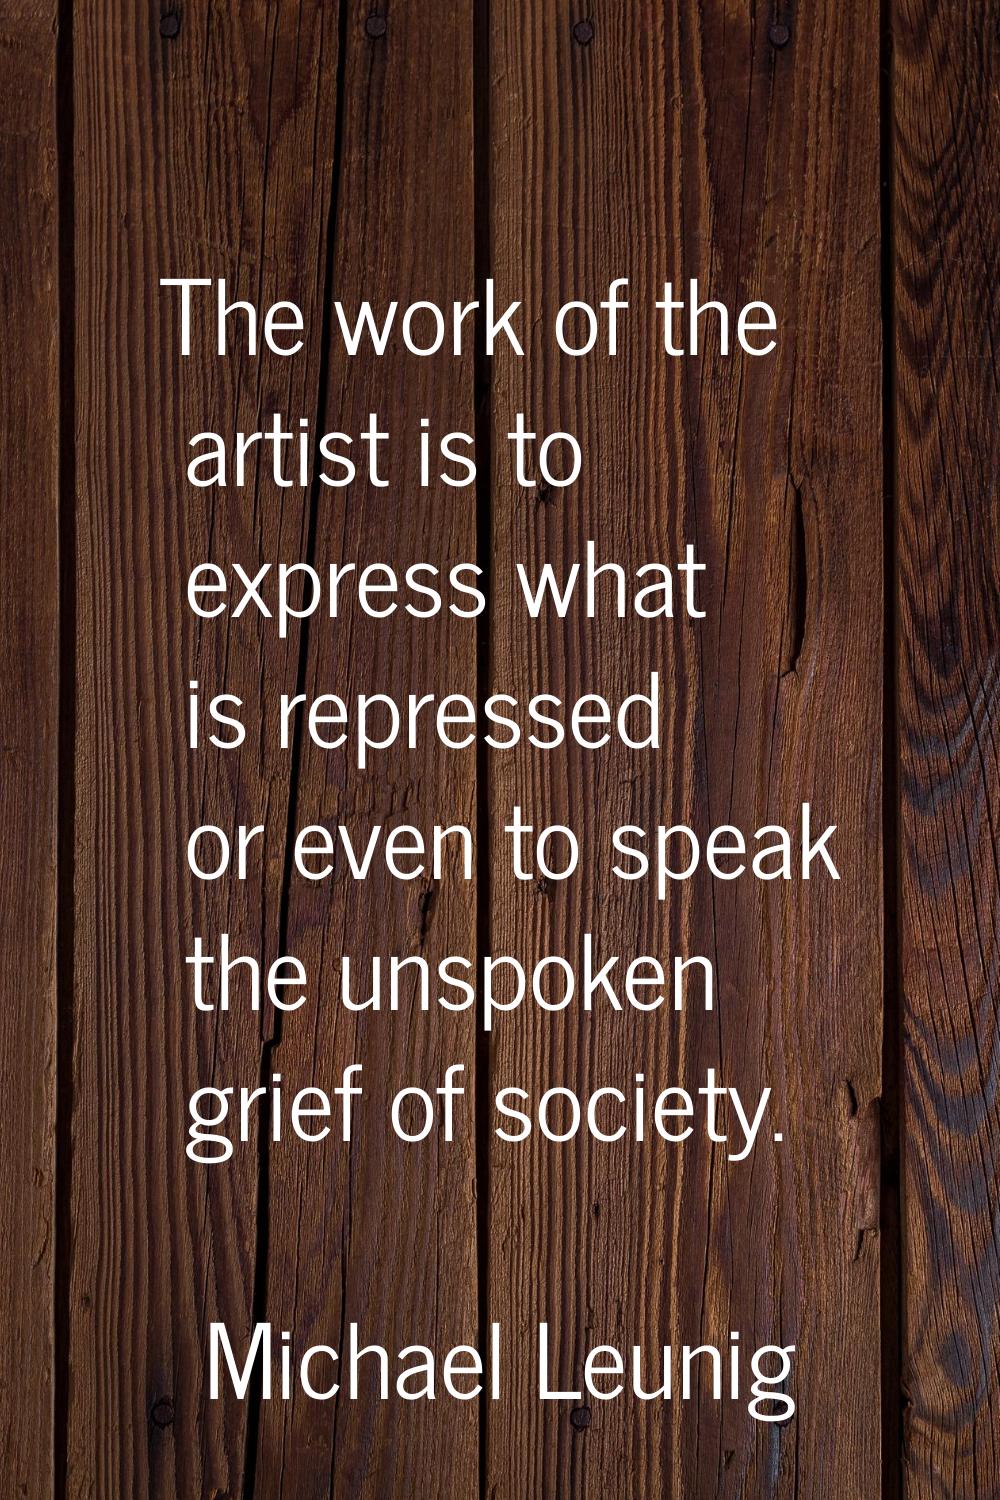 The work of the artist is to express what is repressed or even to speak the unspoken grief of socie